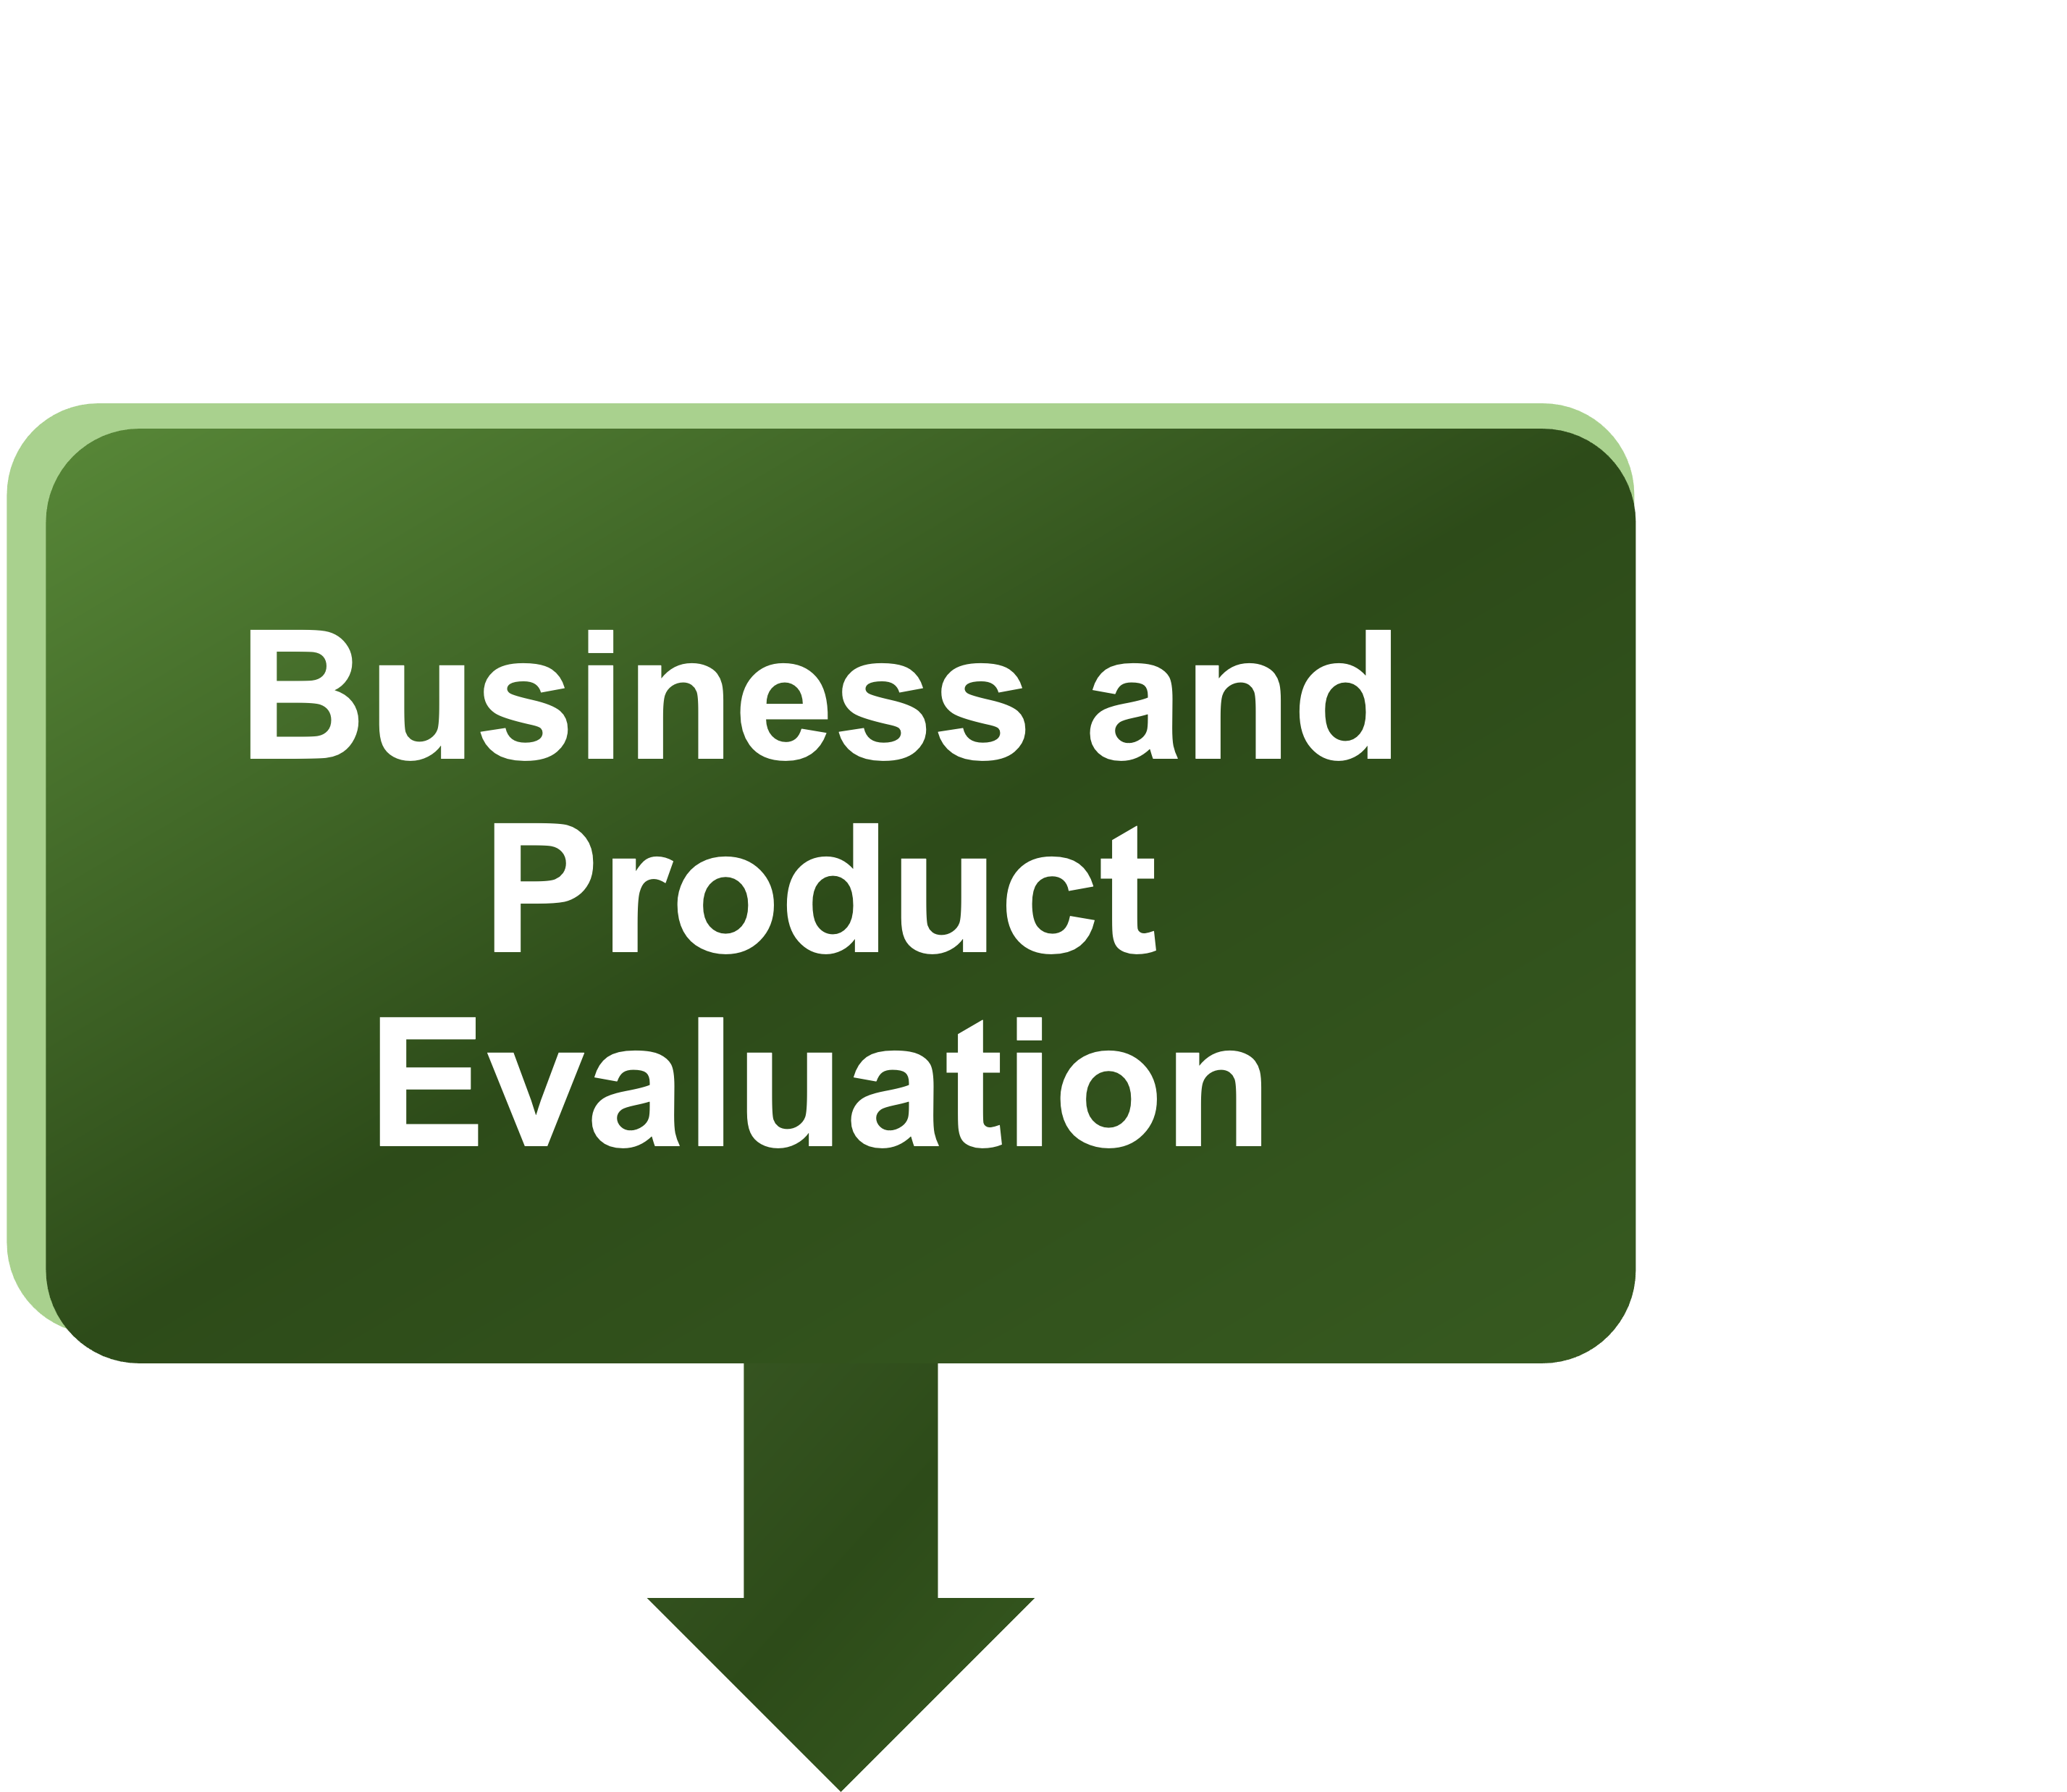 Business and Product Evaluation